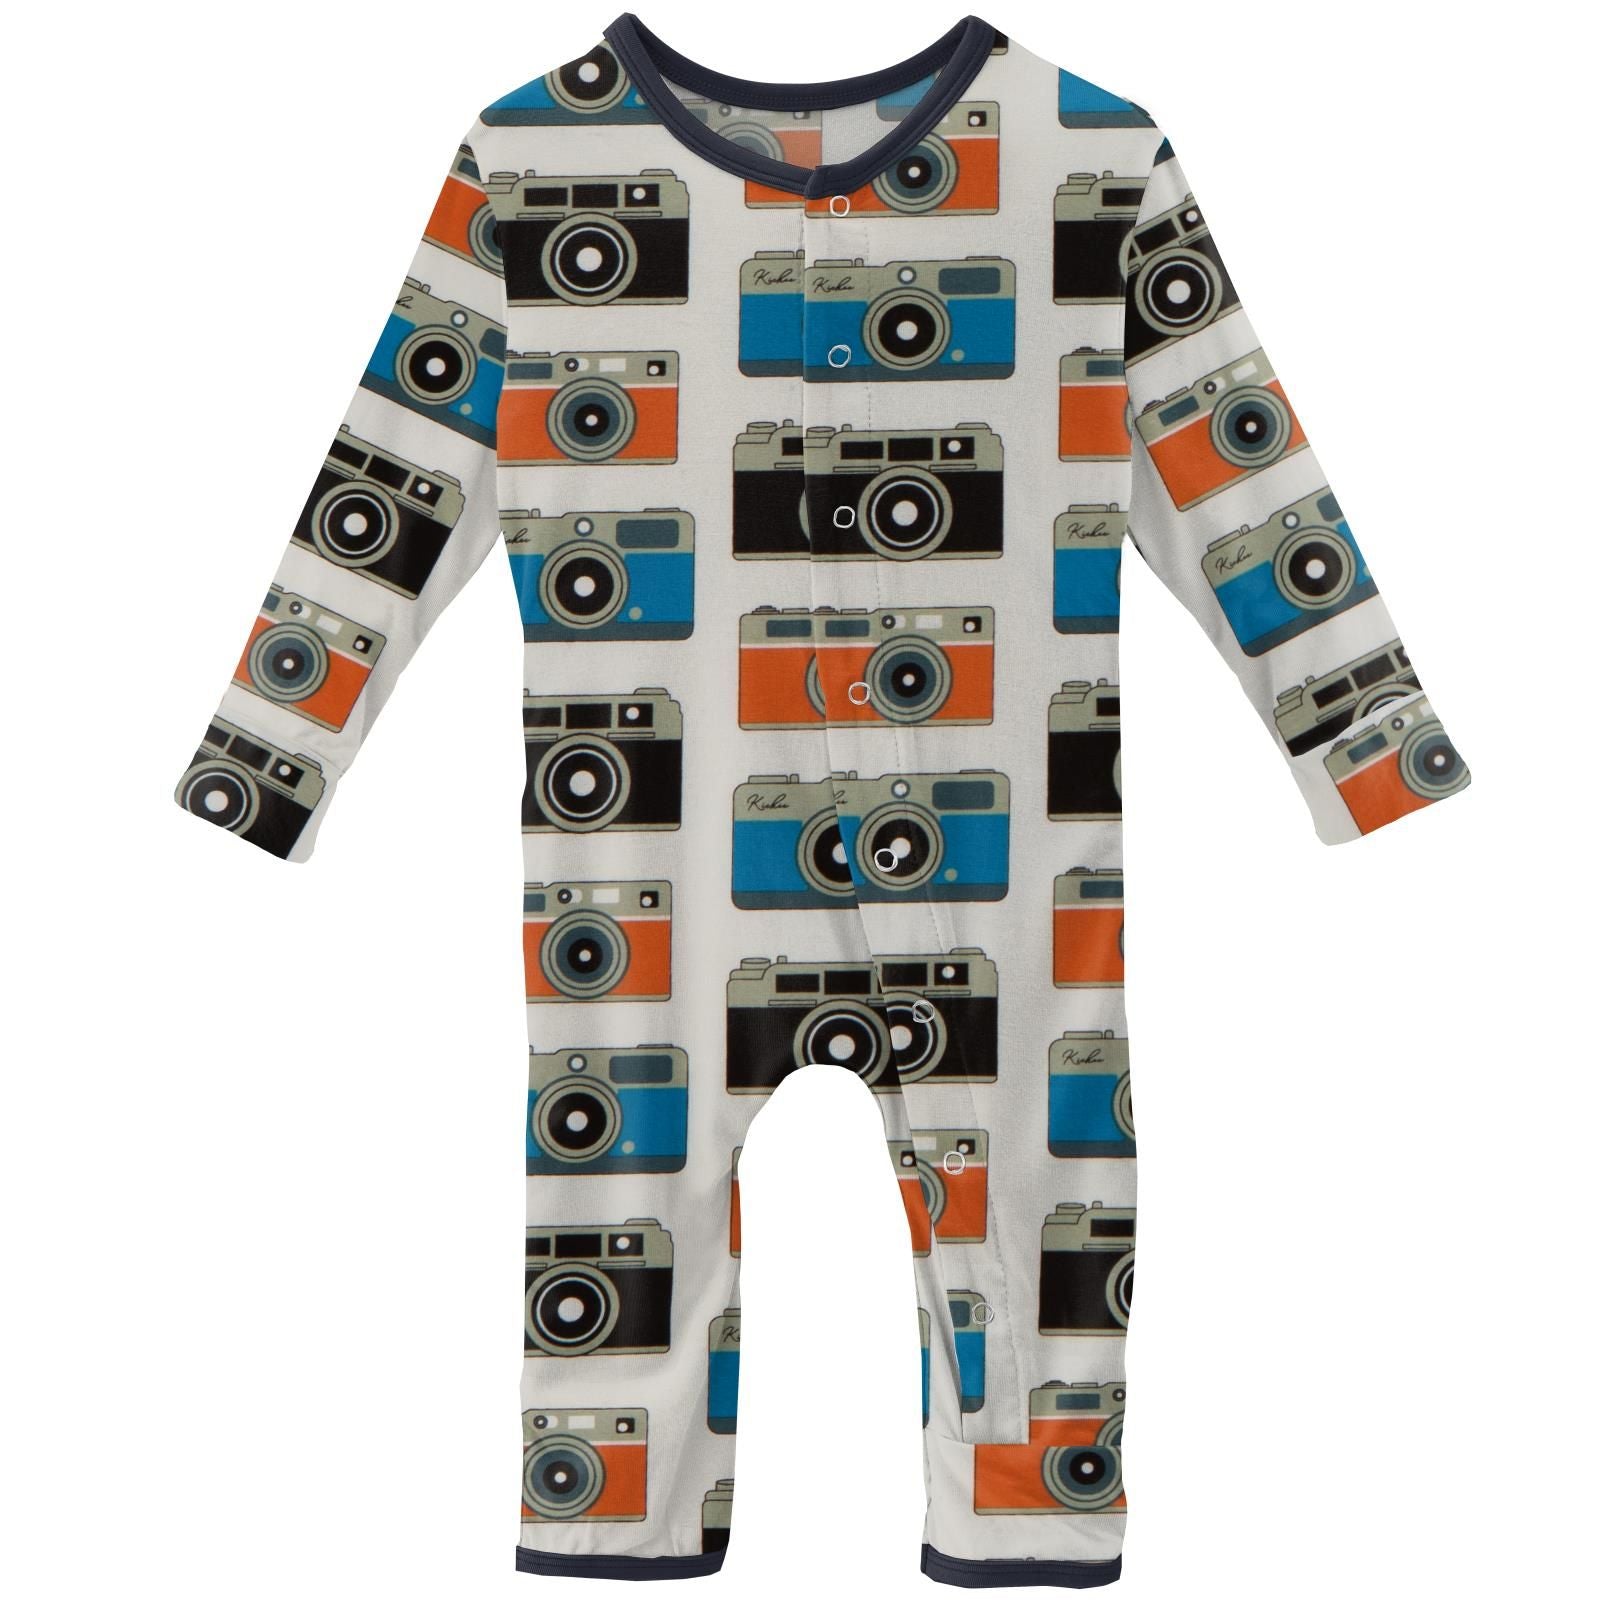 Kickee Pants Print Coverall with Zipper - Silver Sage Lunchboxes